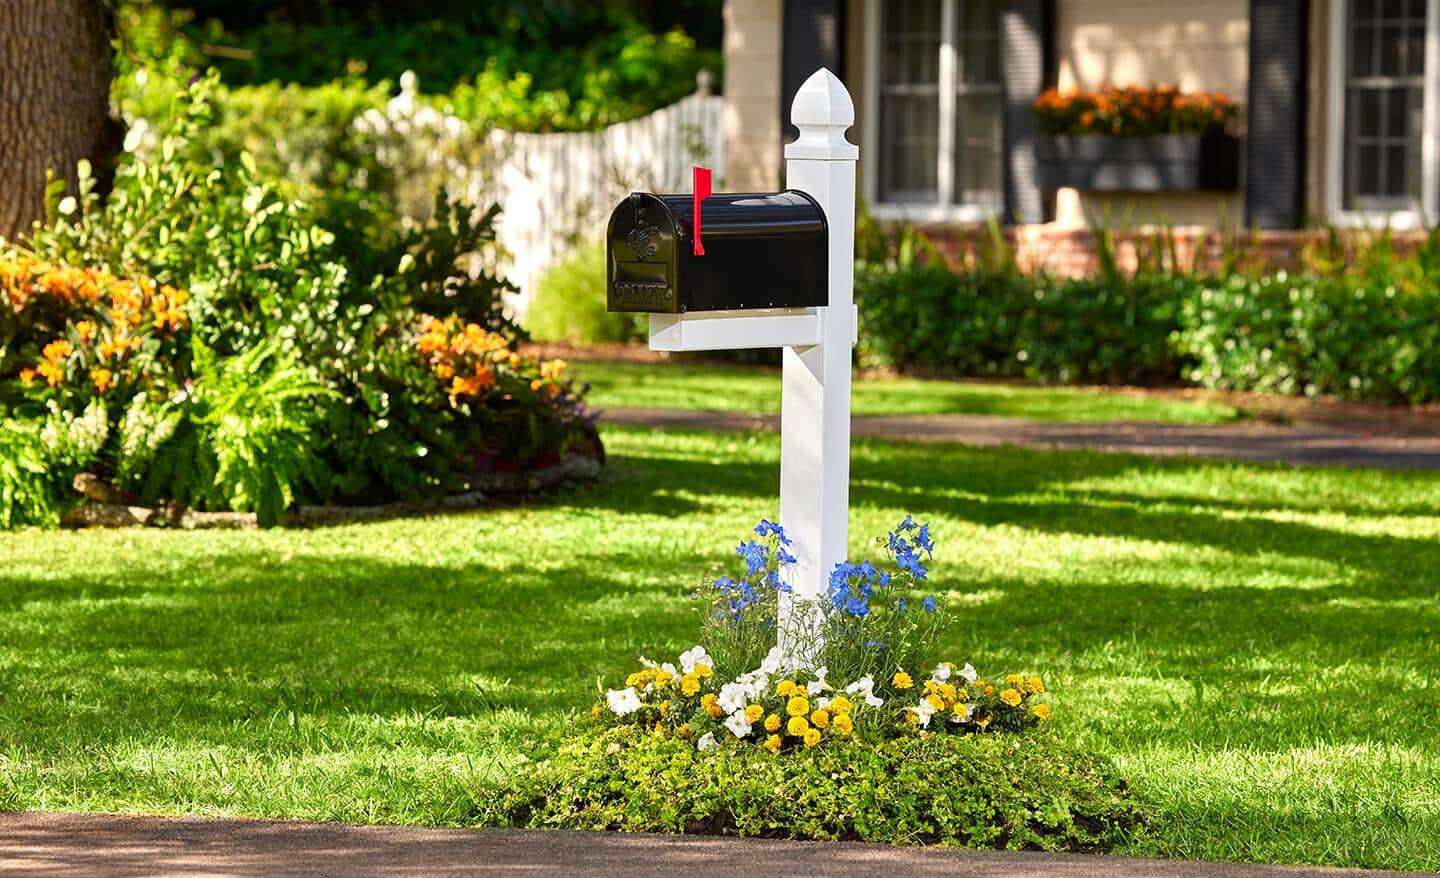 A flower bed surrounds a mailbox in a front yard.